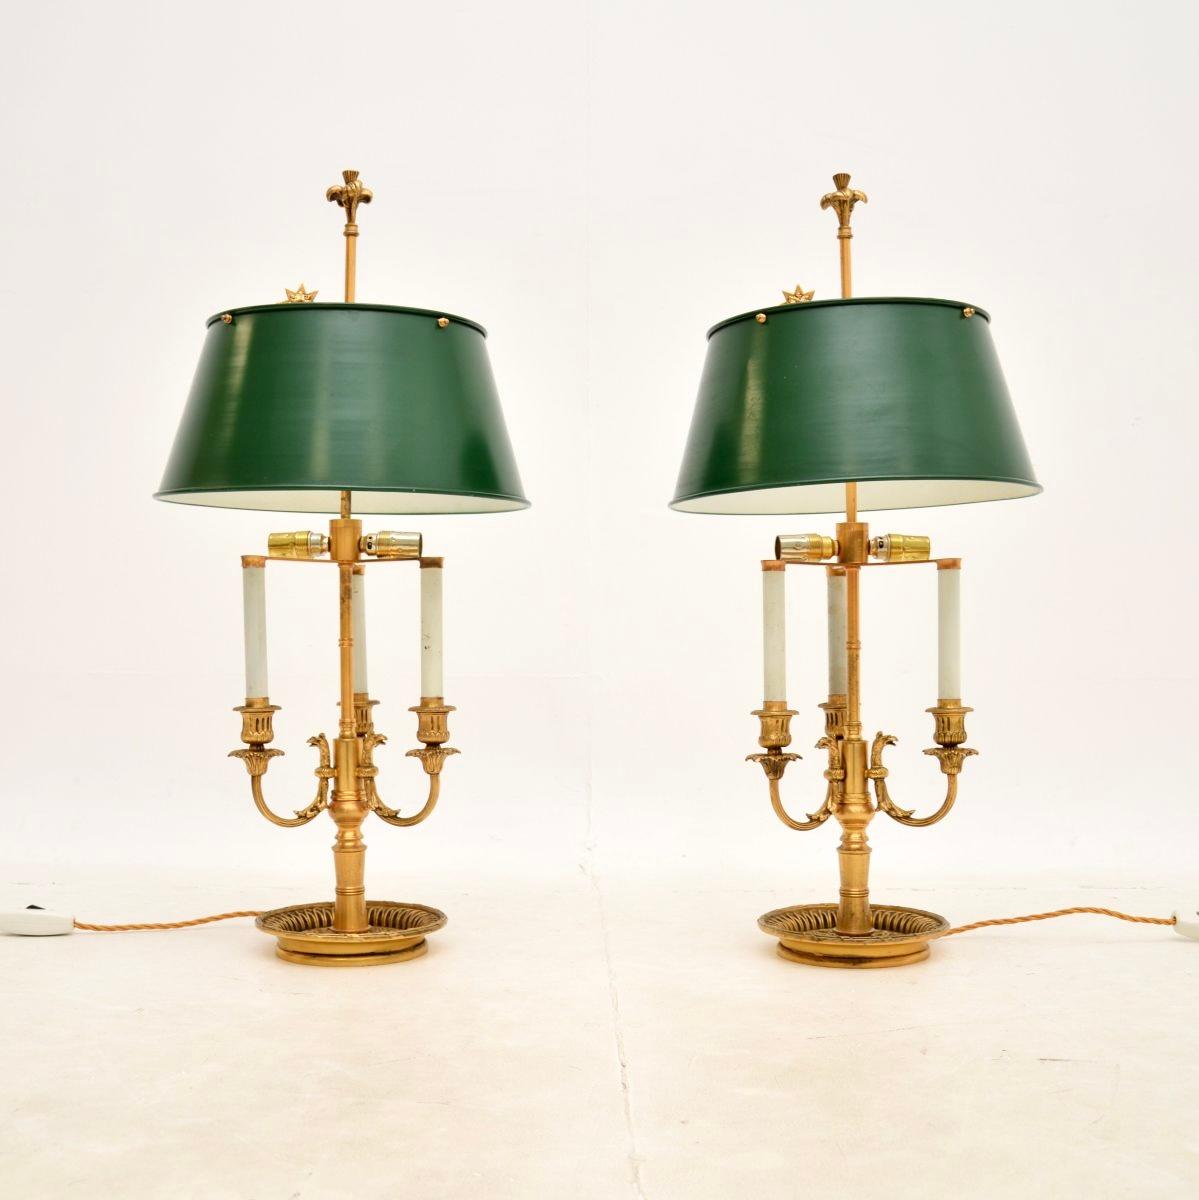 An outstanding large pair of antique brass table lamps with tole shades. We believe they were made in France, and date from around the 1920-30’s.

The quality is superb, the solid brass frames are beautifully made and are very heavy. They have